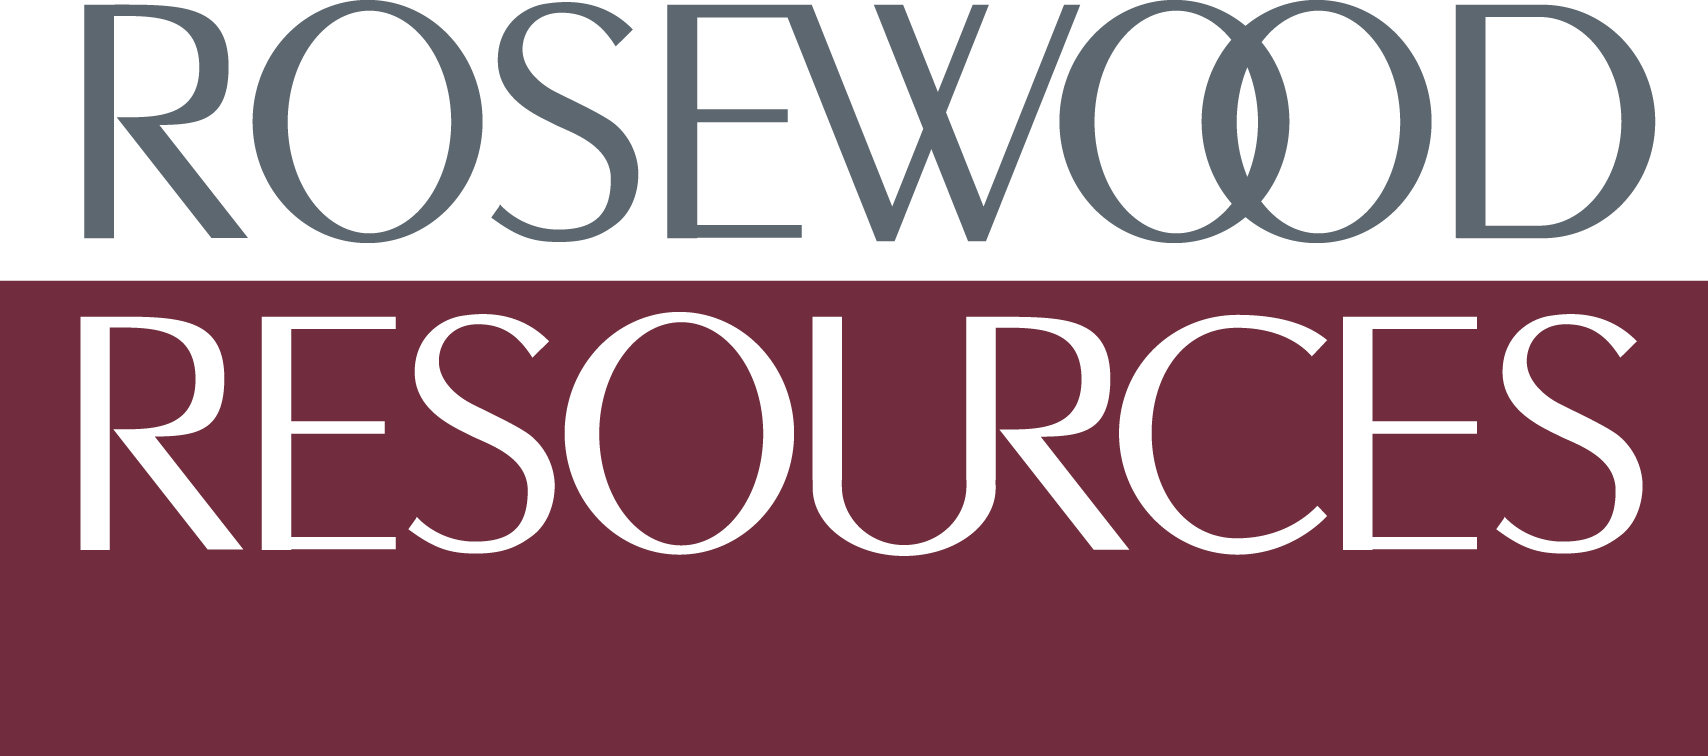 Rosewood Resources